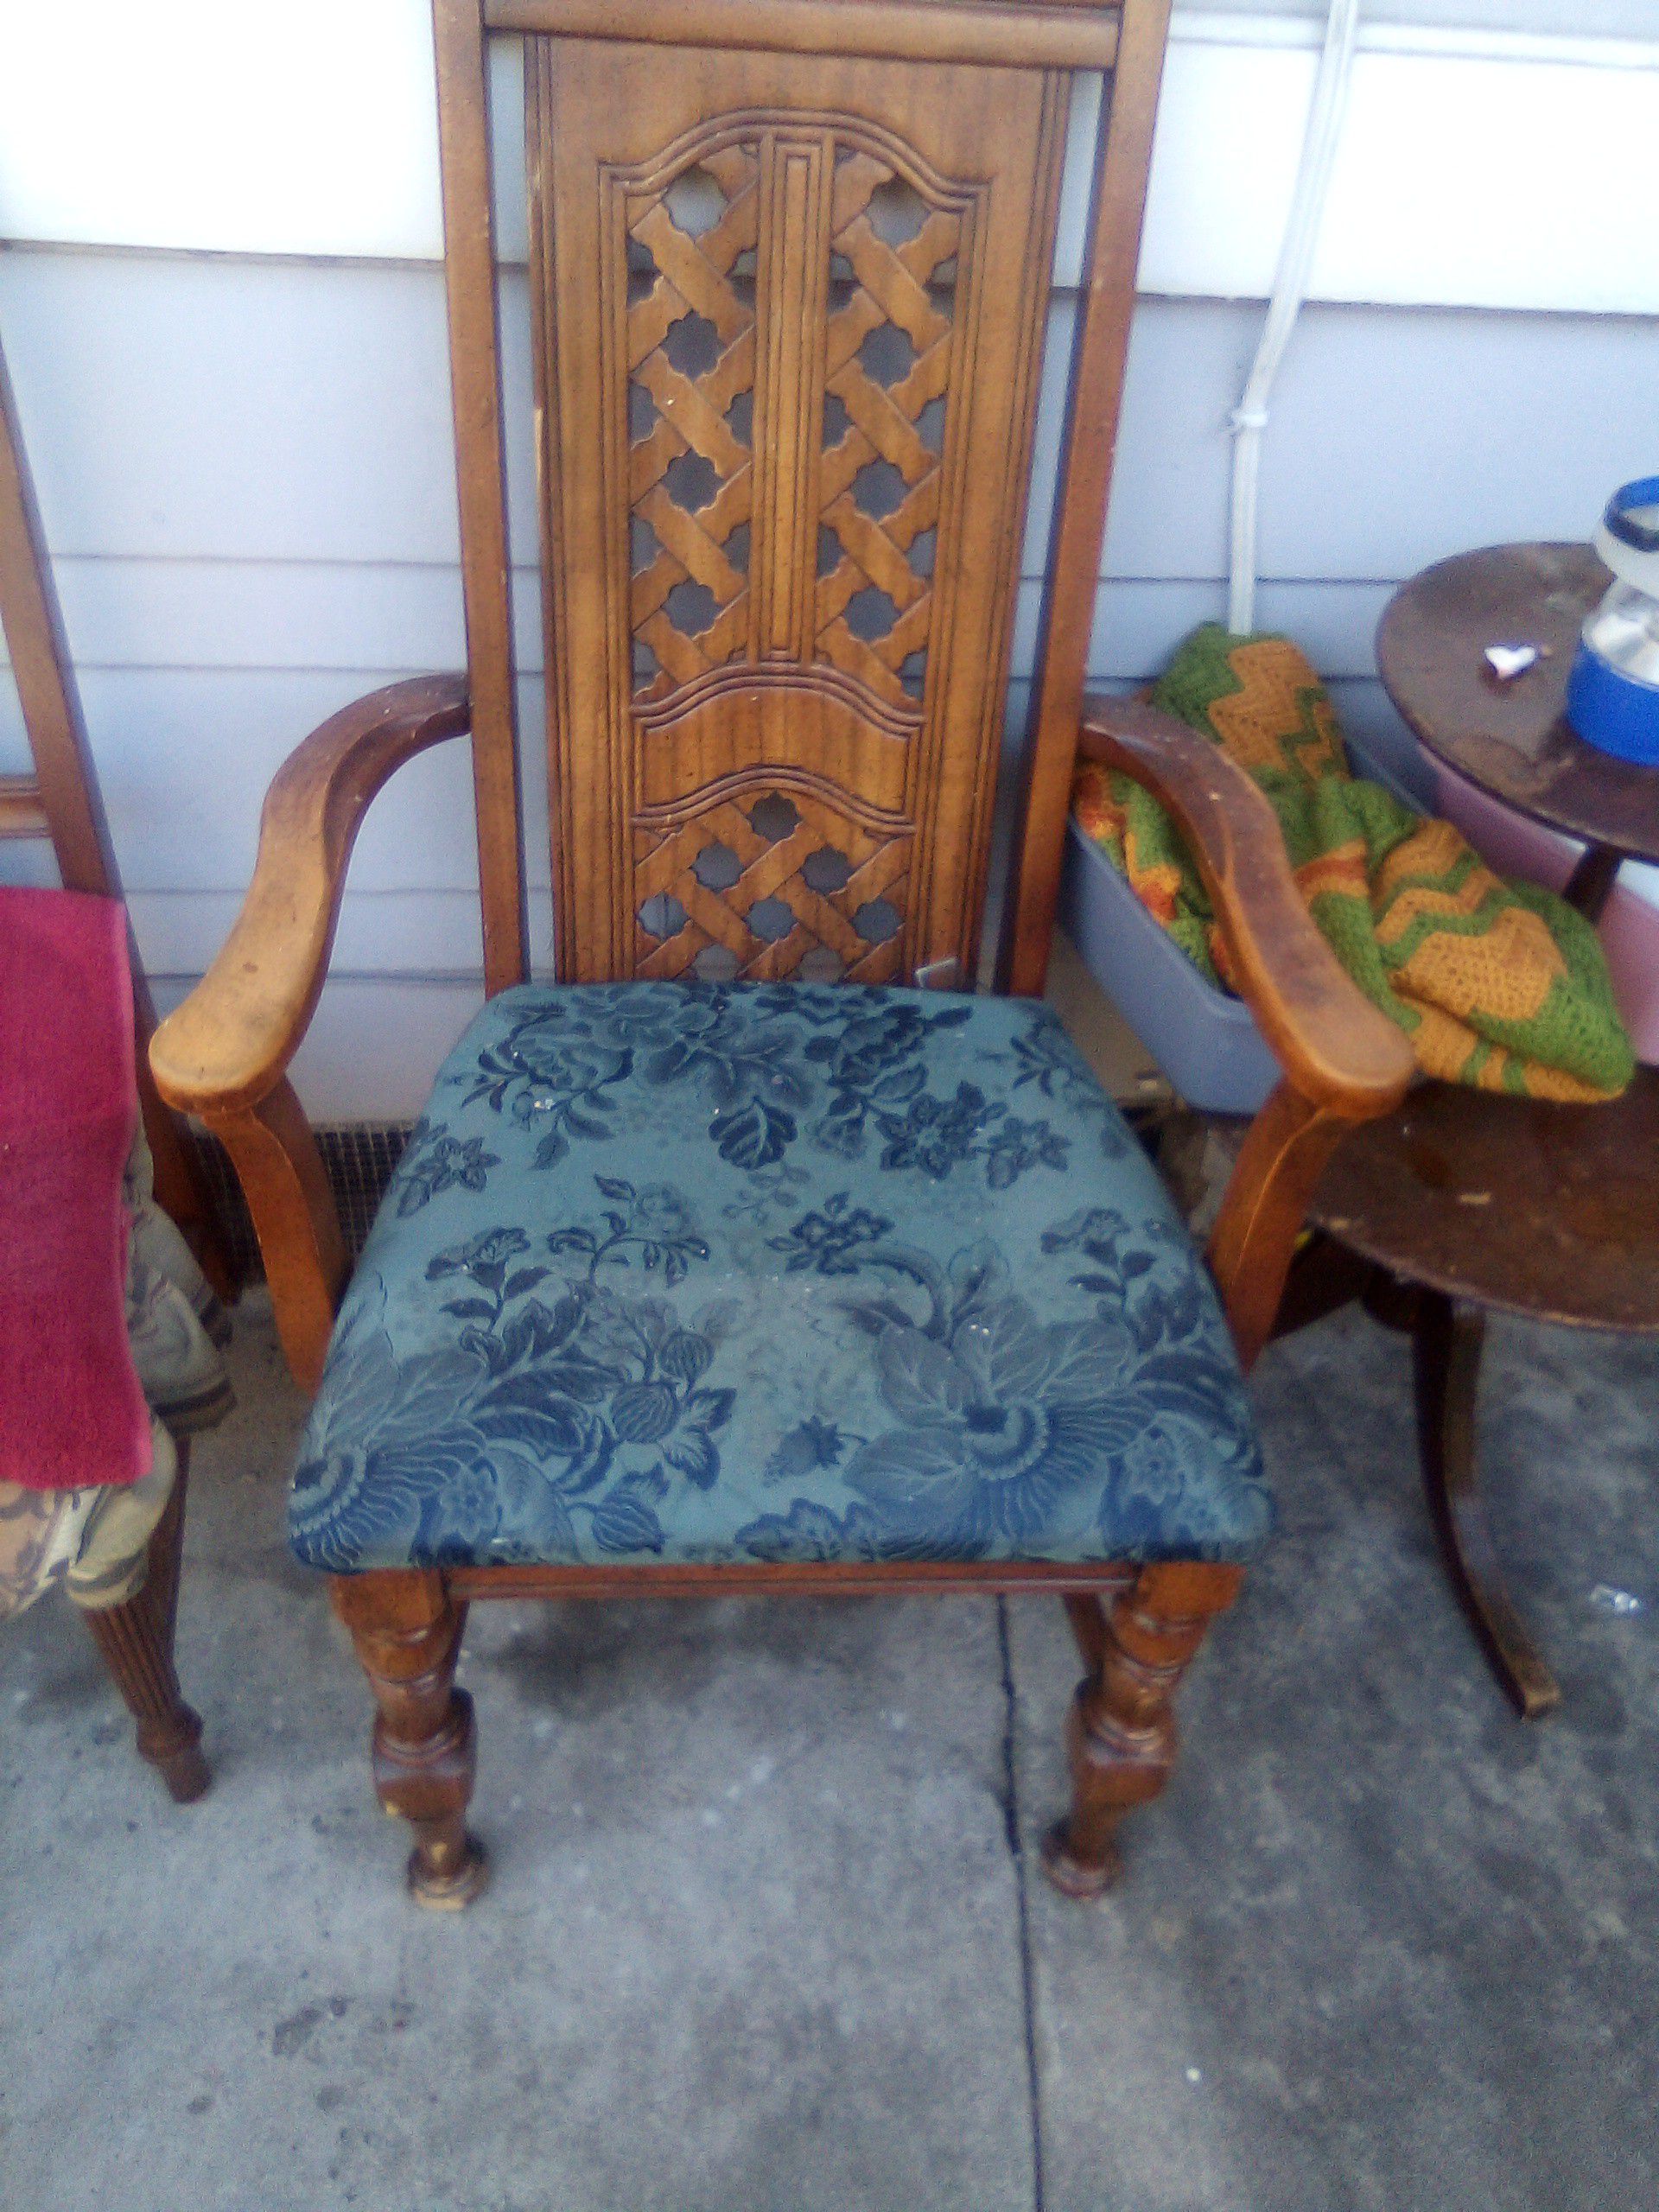 Antique high back wooden chair